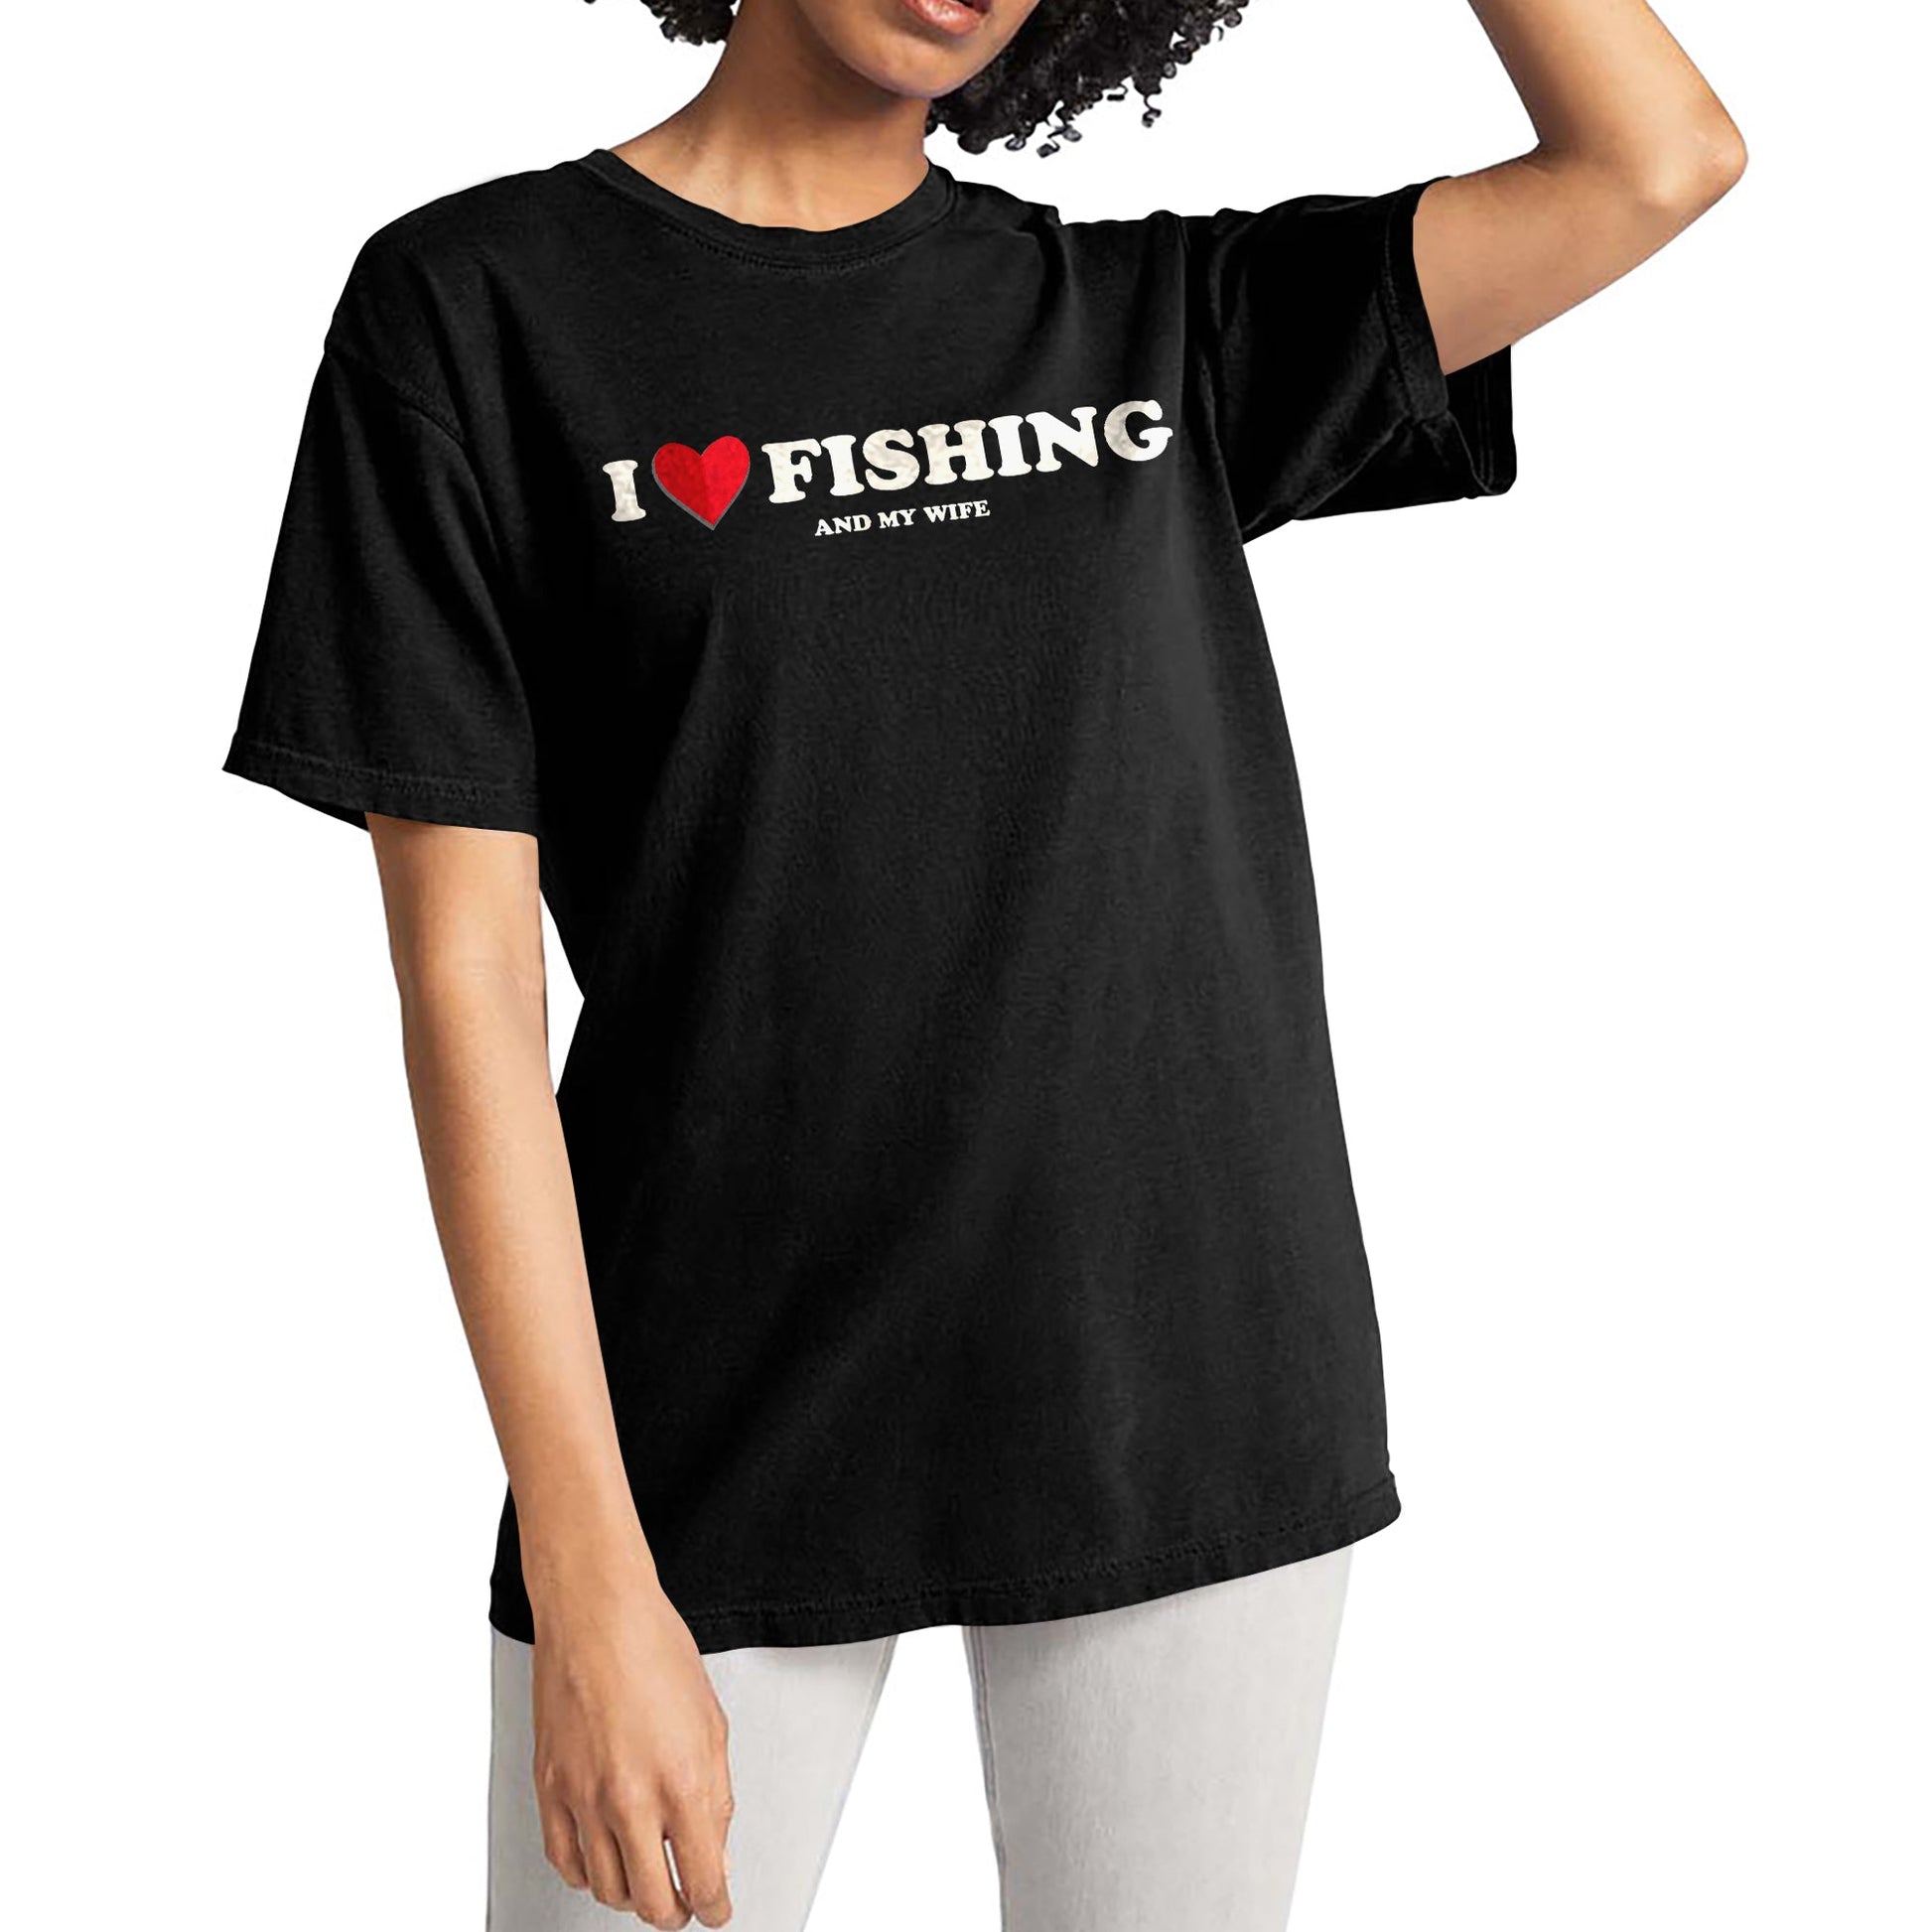 I Heart Fishing Garment-Dyed Tee - Stories You Can Wear